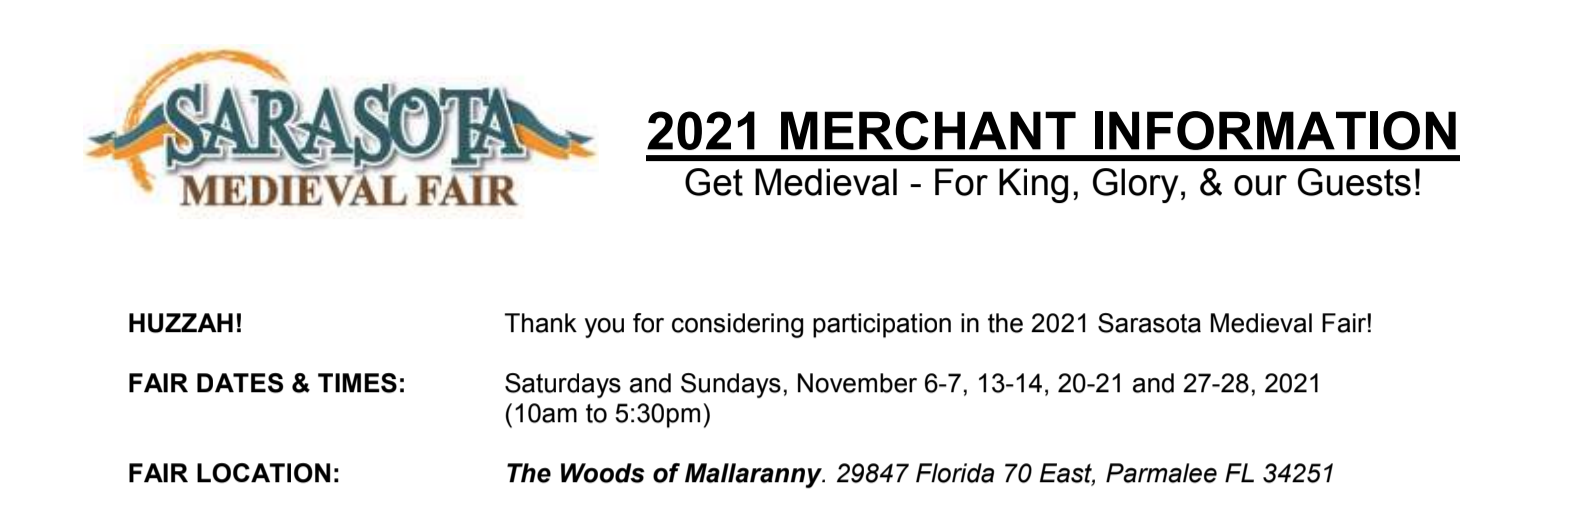 A copy of the Sarasota Medieval Fair vendor application shows the Mallaranny property as the site of the 2021 fair. The Sarasota Medieval Fair and its president, Jeremy Croteau, didn't return requests for comment.